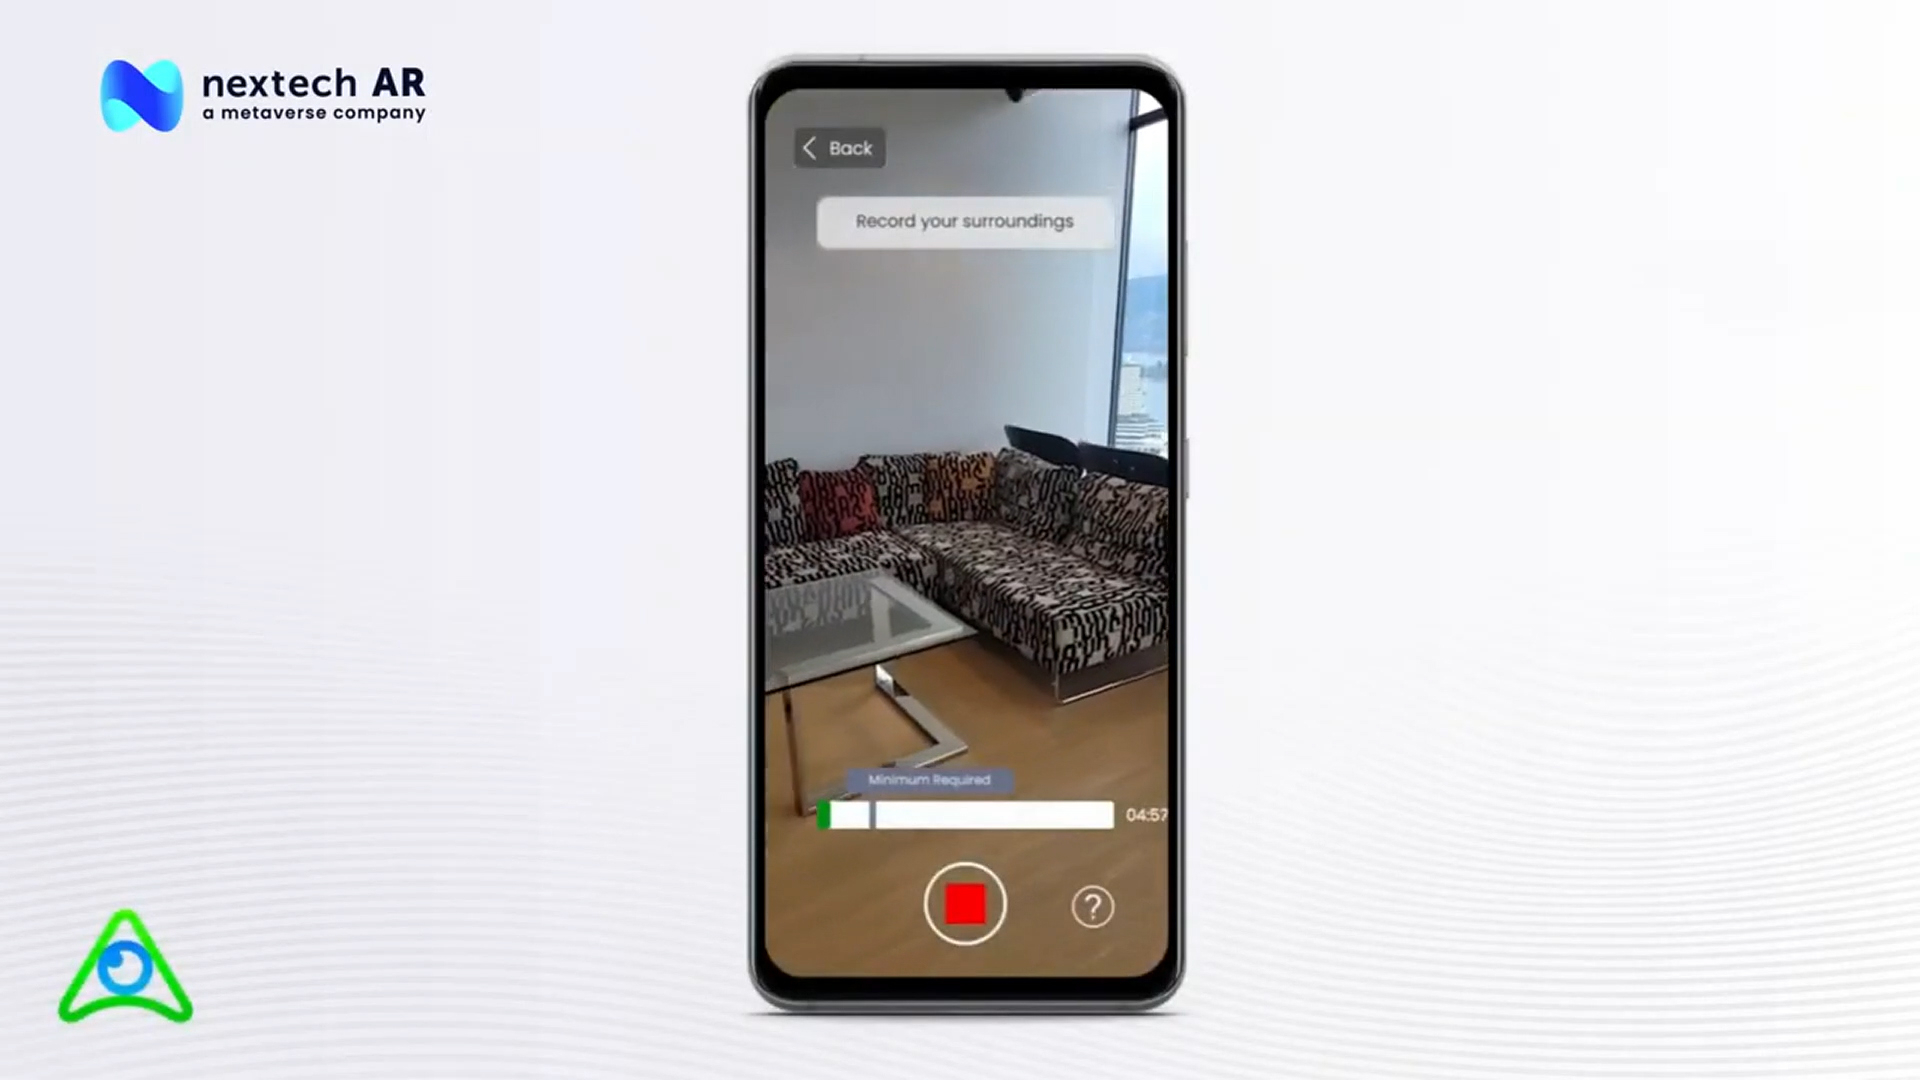 Here’s your chance to create your mini-metaverse! ARitize Maps is your all-in-one metaverse creation studio. Allows you to spatially map your location and enhance your space with interactive, location persistent AR experiences, including 3D objects, navigations, wayfinding, audio and more.